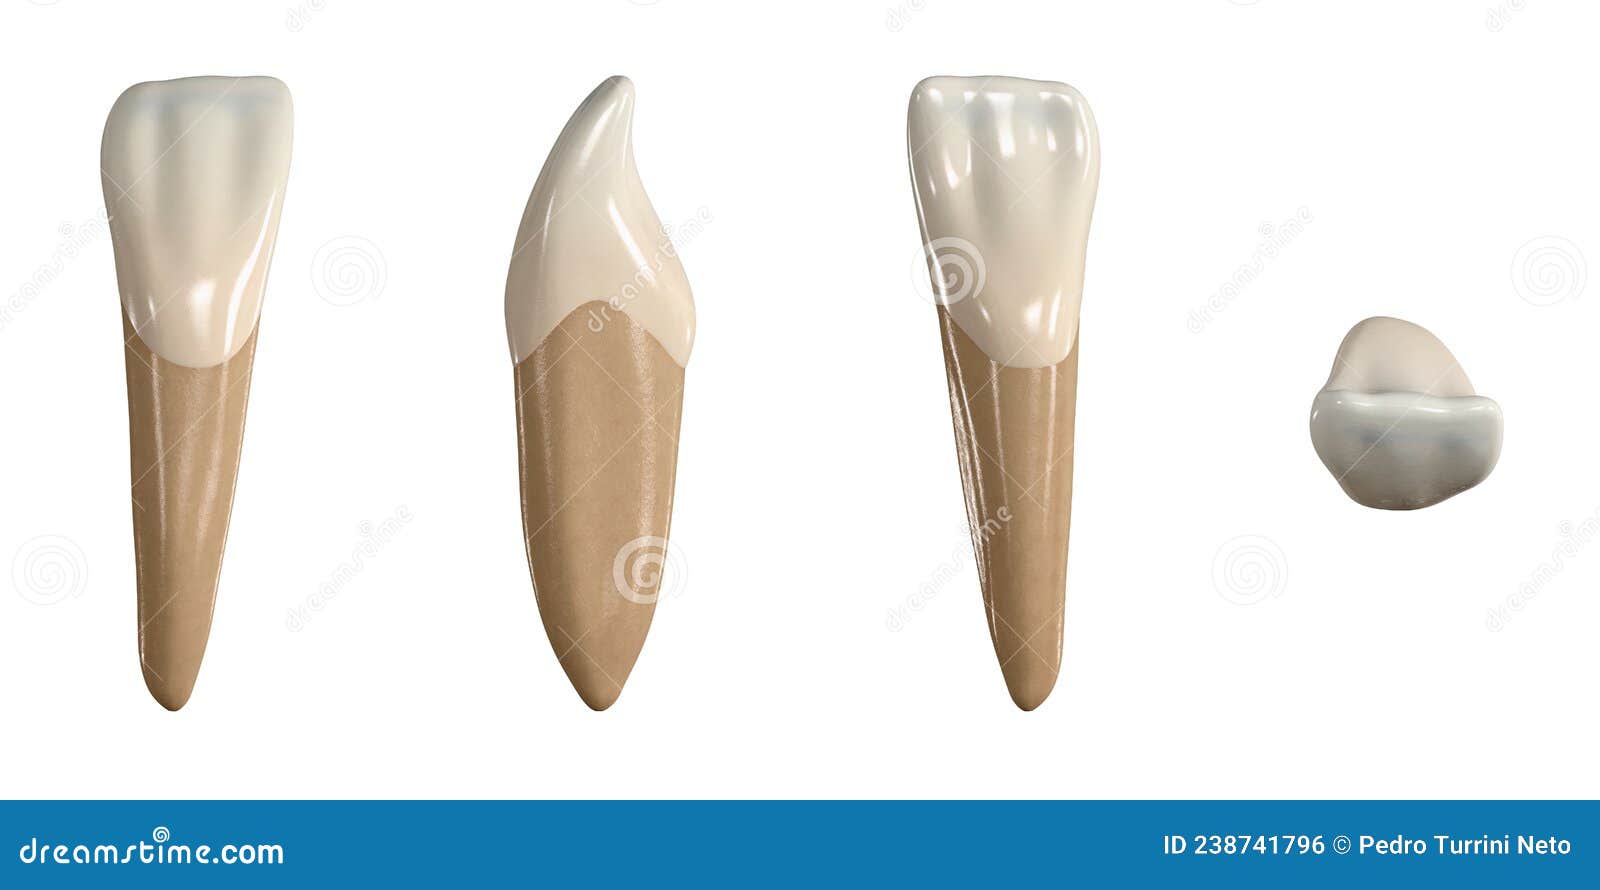 permanent lower lateral incisor tooth. 3d  of the anatomy of the mandibular lateral incisor tooth in buccal, proximal,